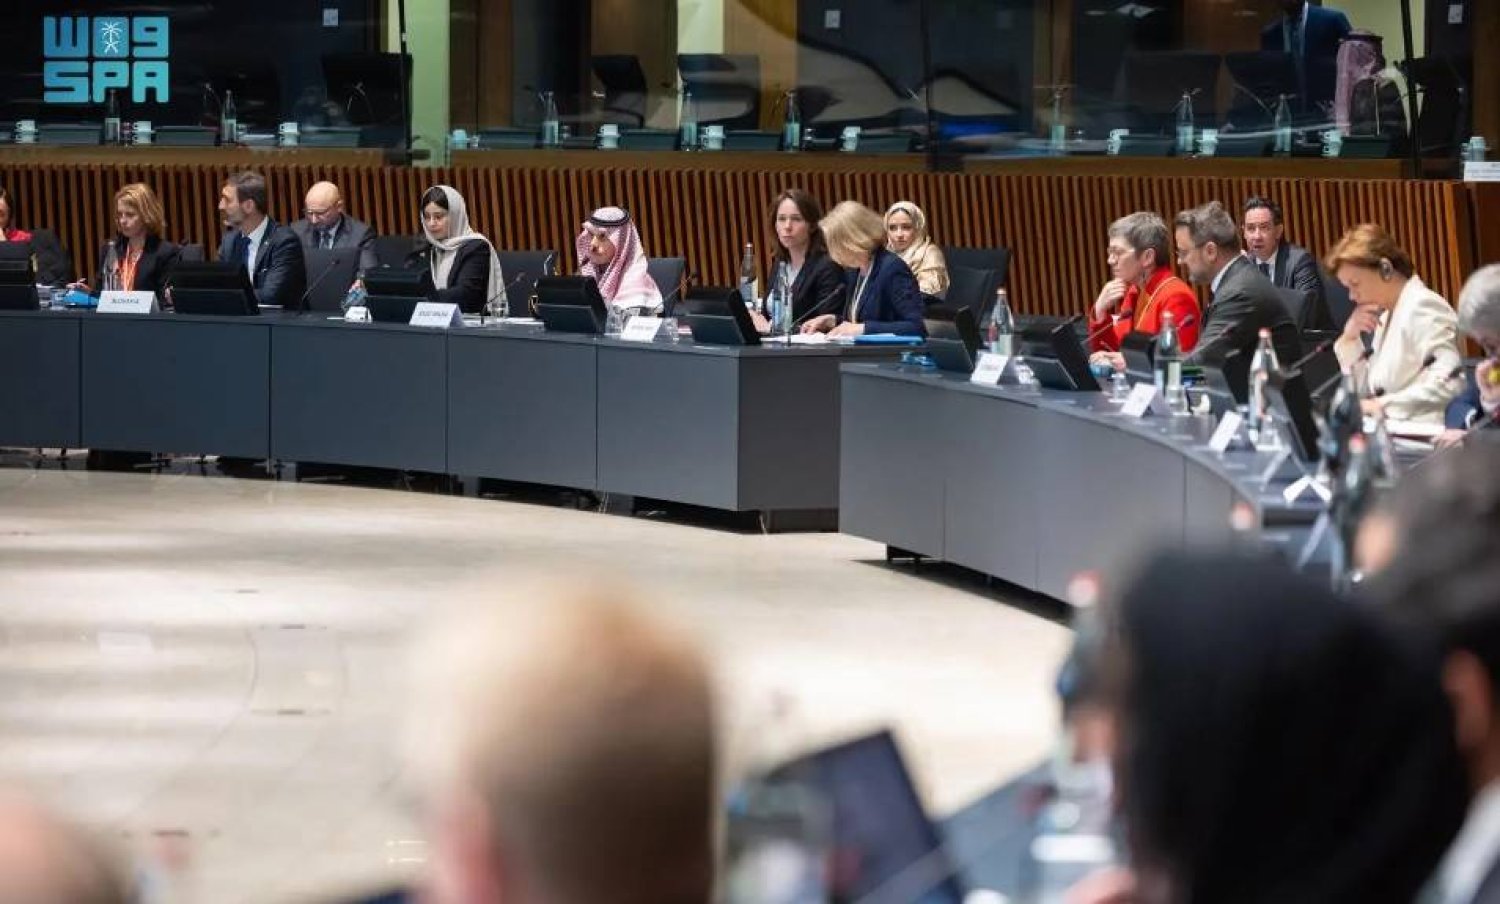 The Saudi Minister of Foreign Affairs participated on Monday in the opening of the High-Level Forum on Regional Security and Cooperation between the EU and the GCC in Luxembourg. SPA